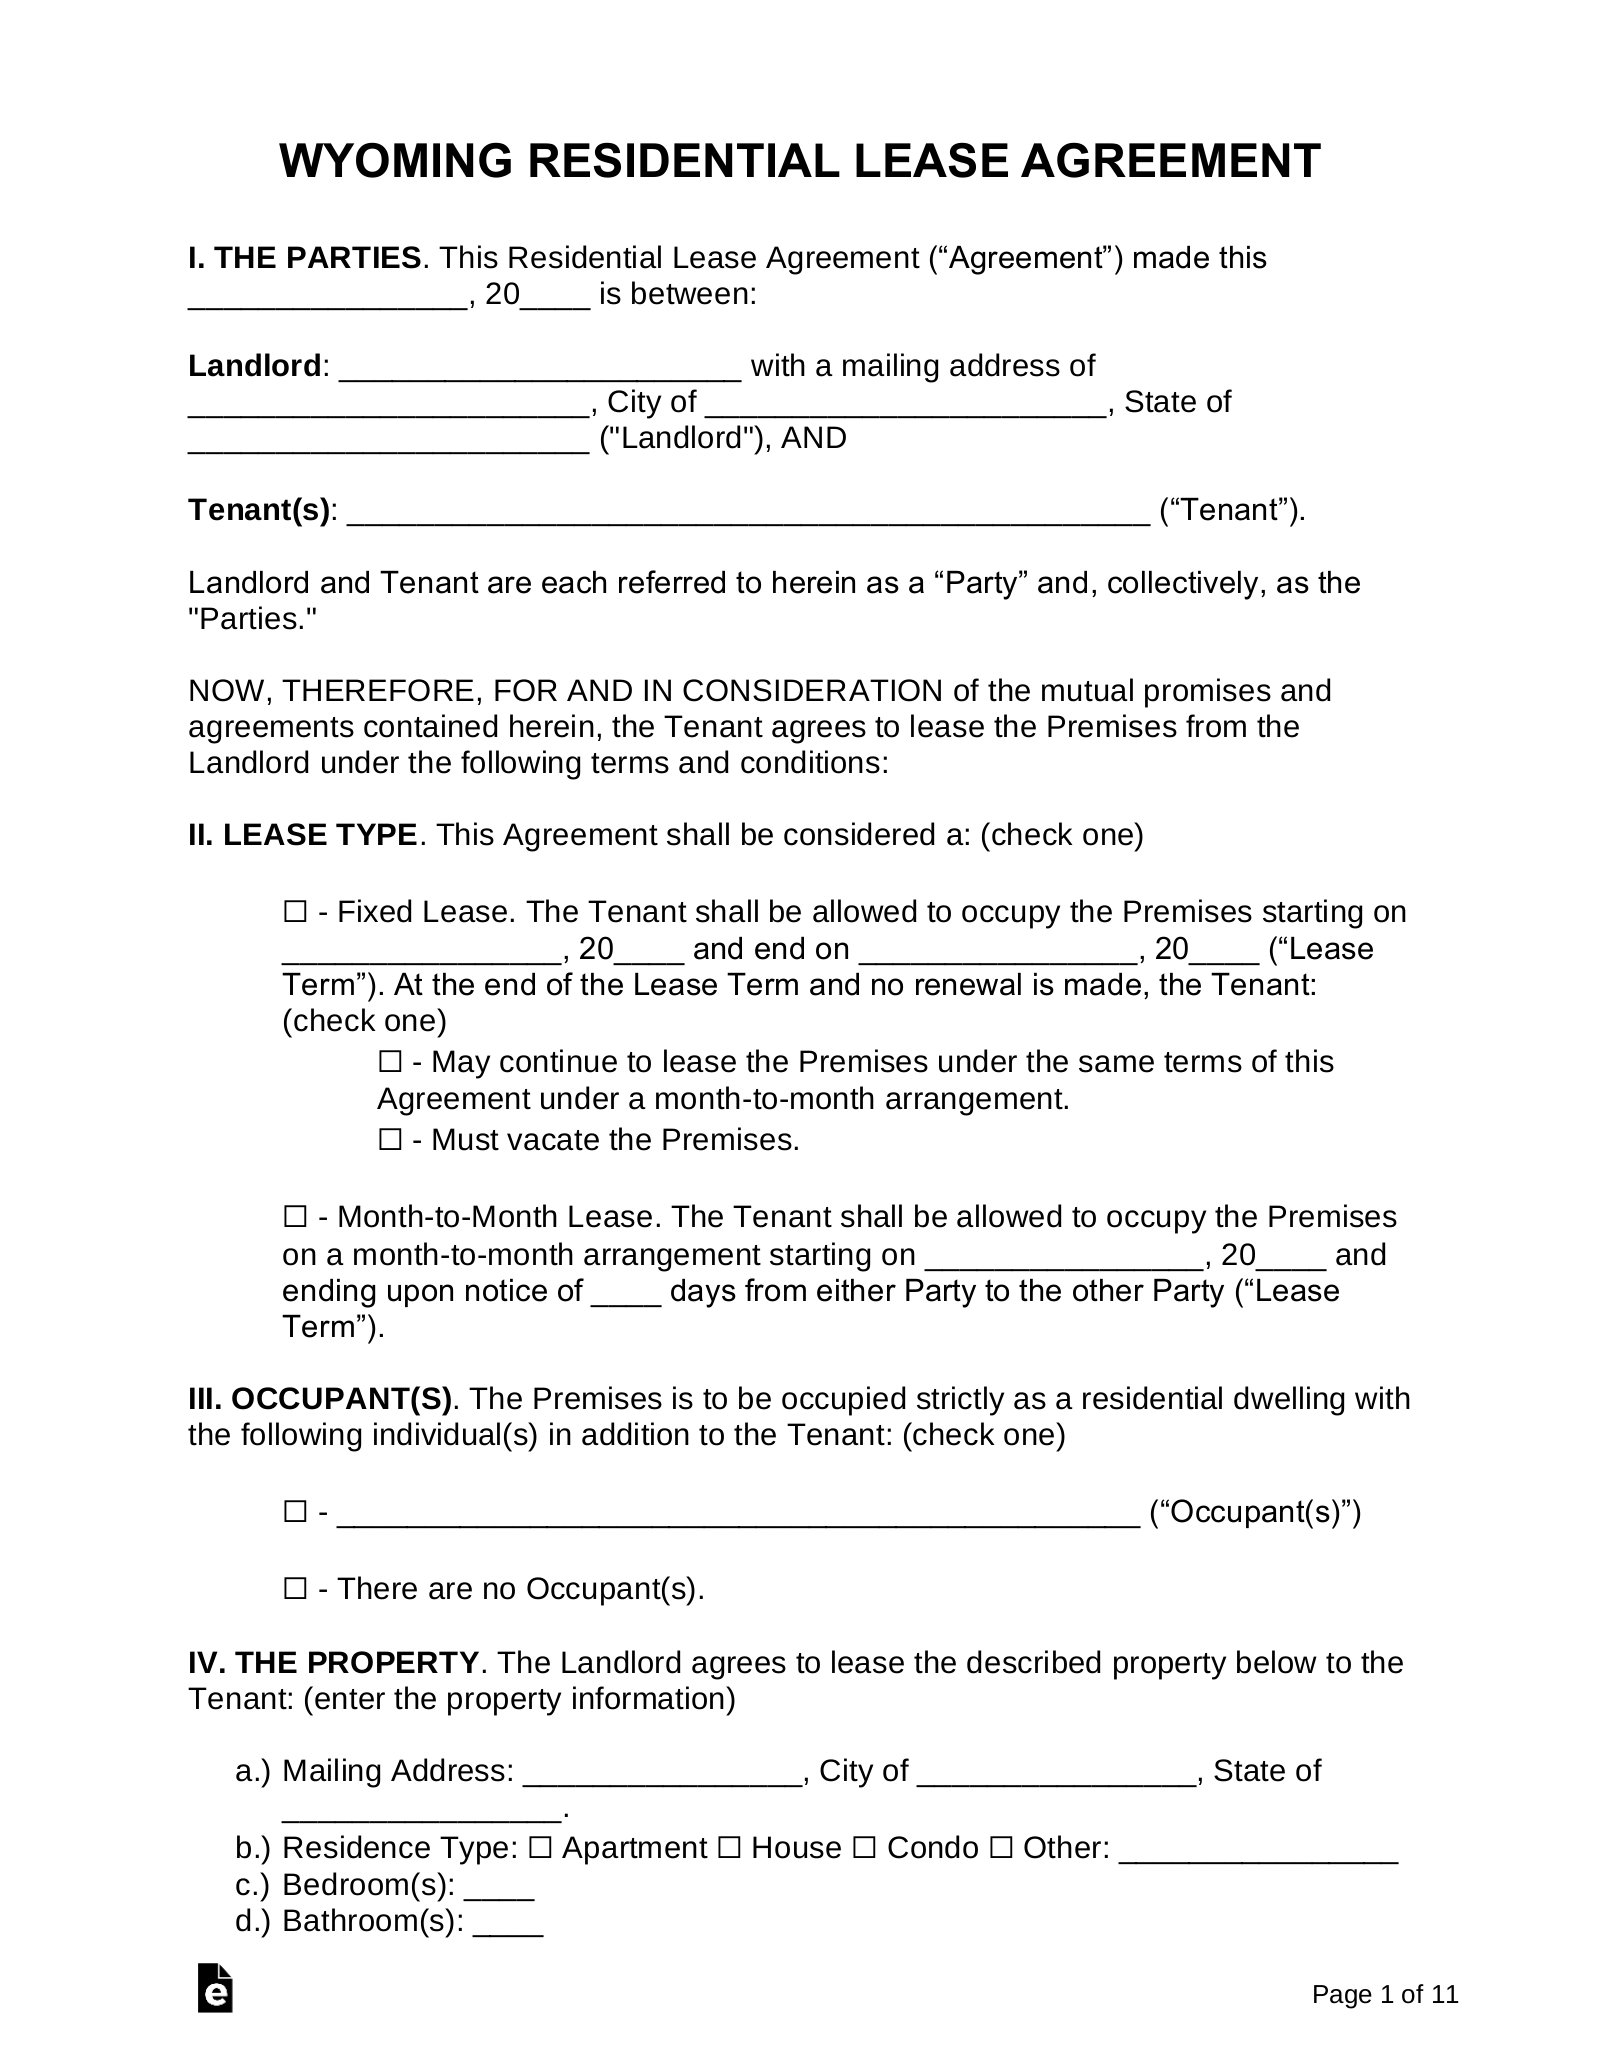 Wyoming Lease Agreement Templates (6)